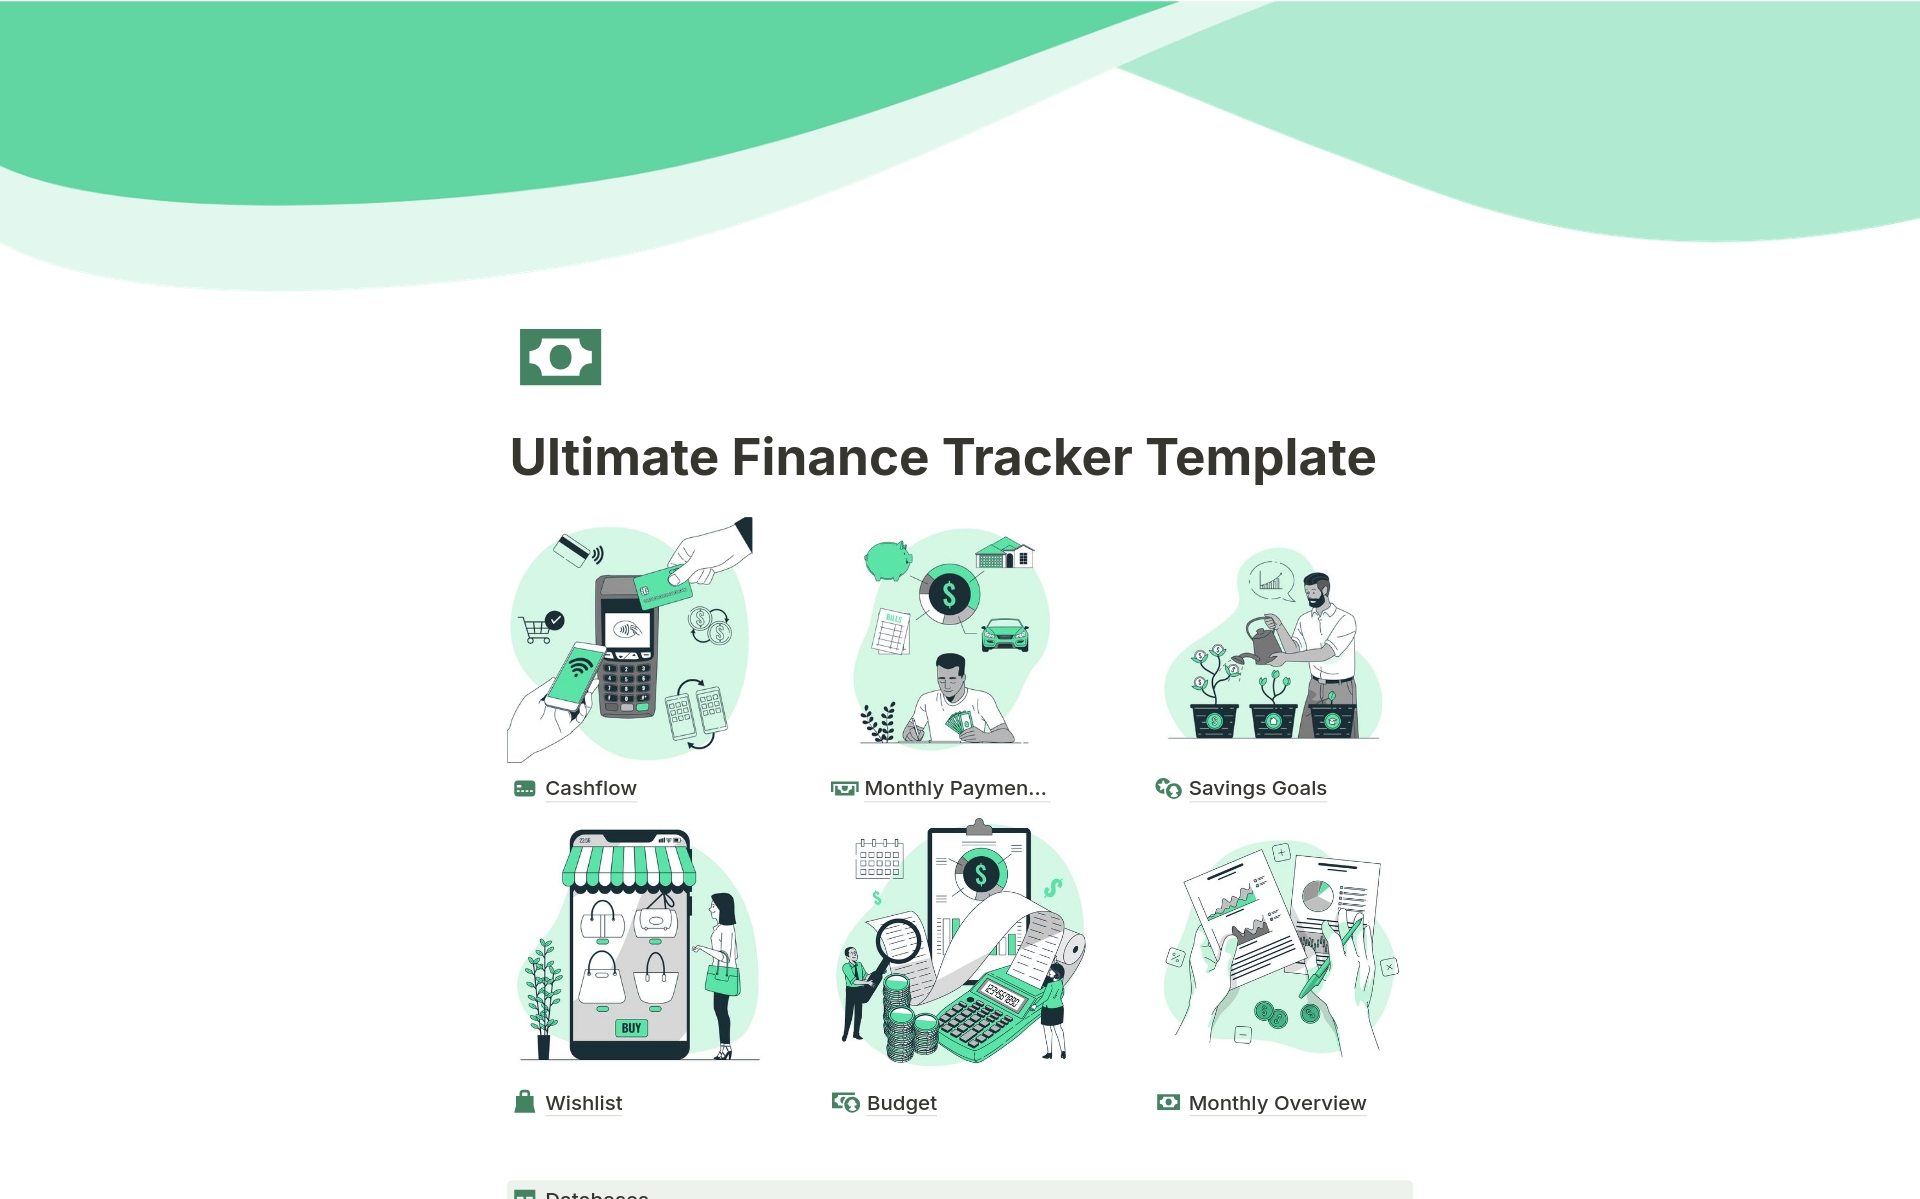 Get your financial life in order with this clean, comprehensive, Ultimate Finance Tracker Template!